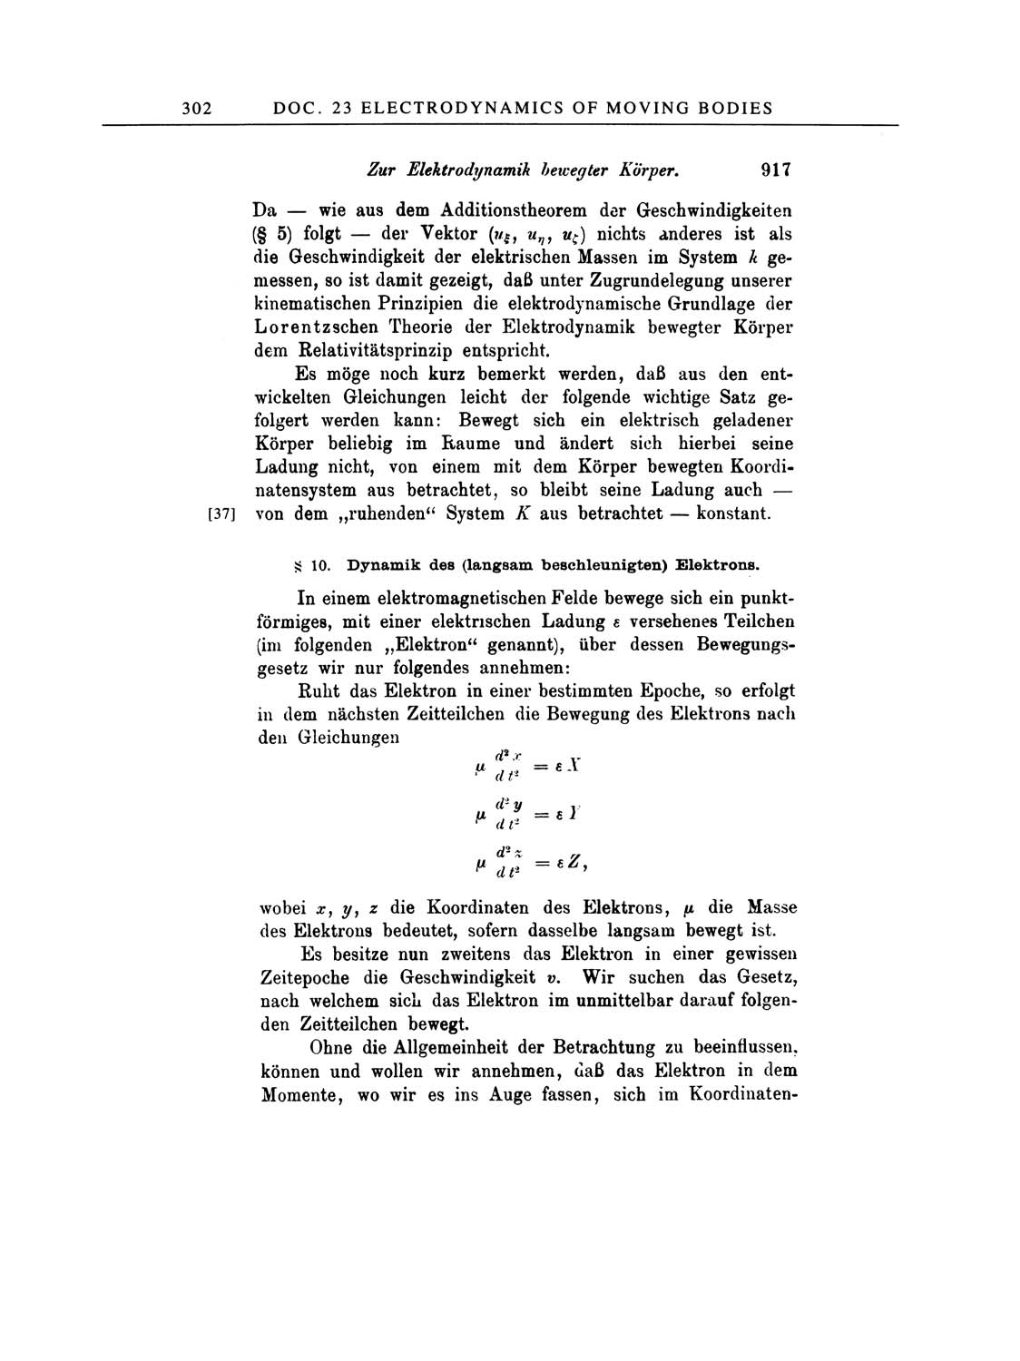 Volume 2: The Swiss Years: Writings, 1900-1909 page 302